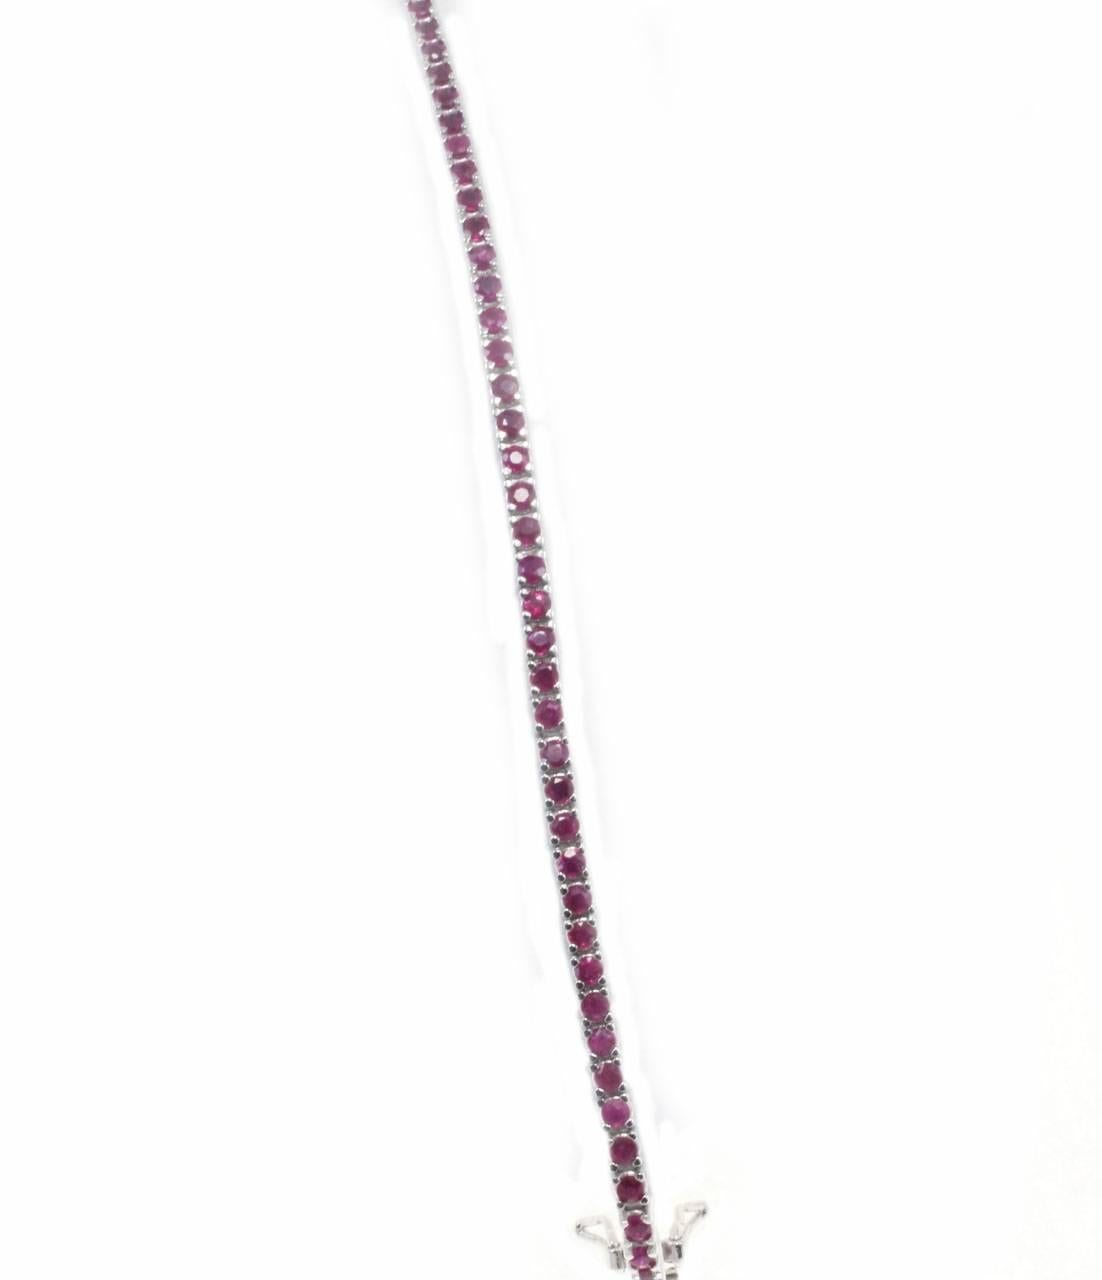 Classic and charming tennis bracelet mounted in 14Kt white gold, with a single strand of rubies.
Tot weight 9.6 gr
Rubies 3.84 Kt

Rf.gcau